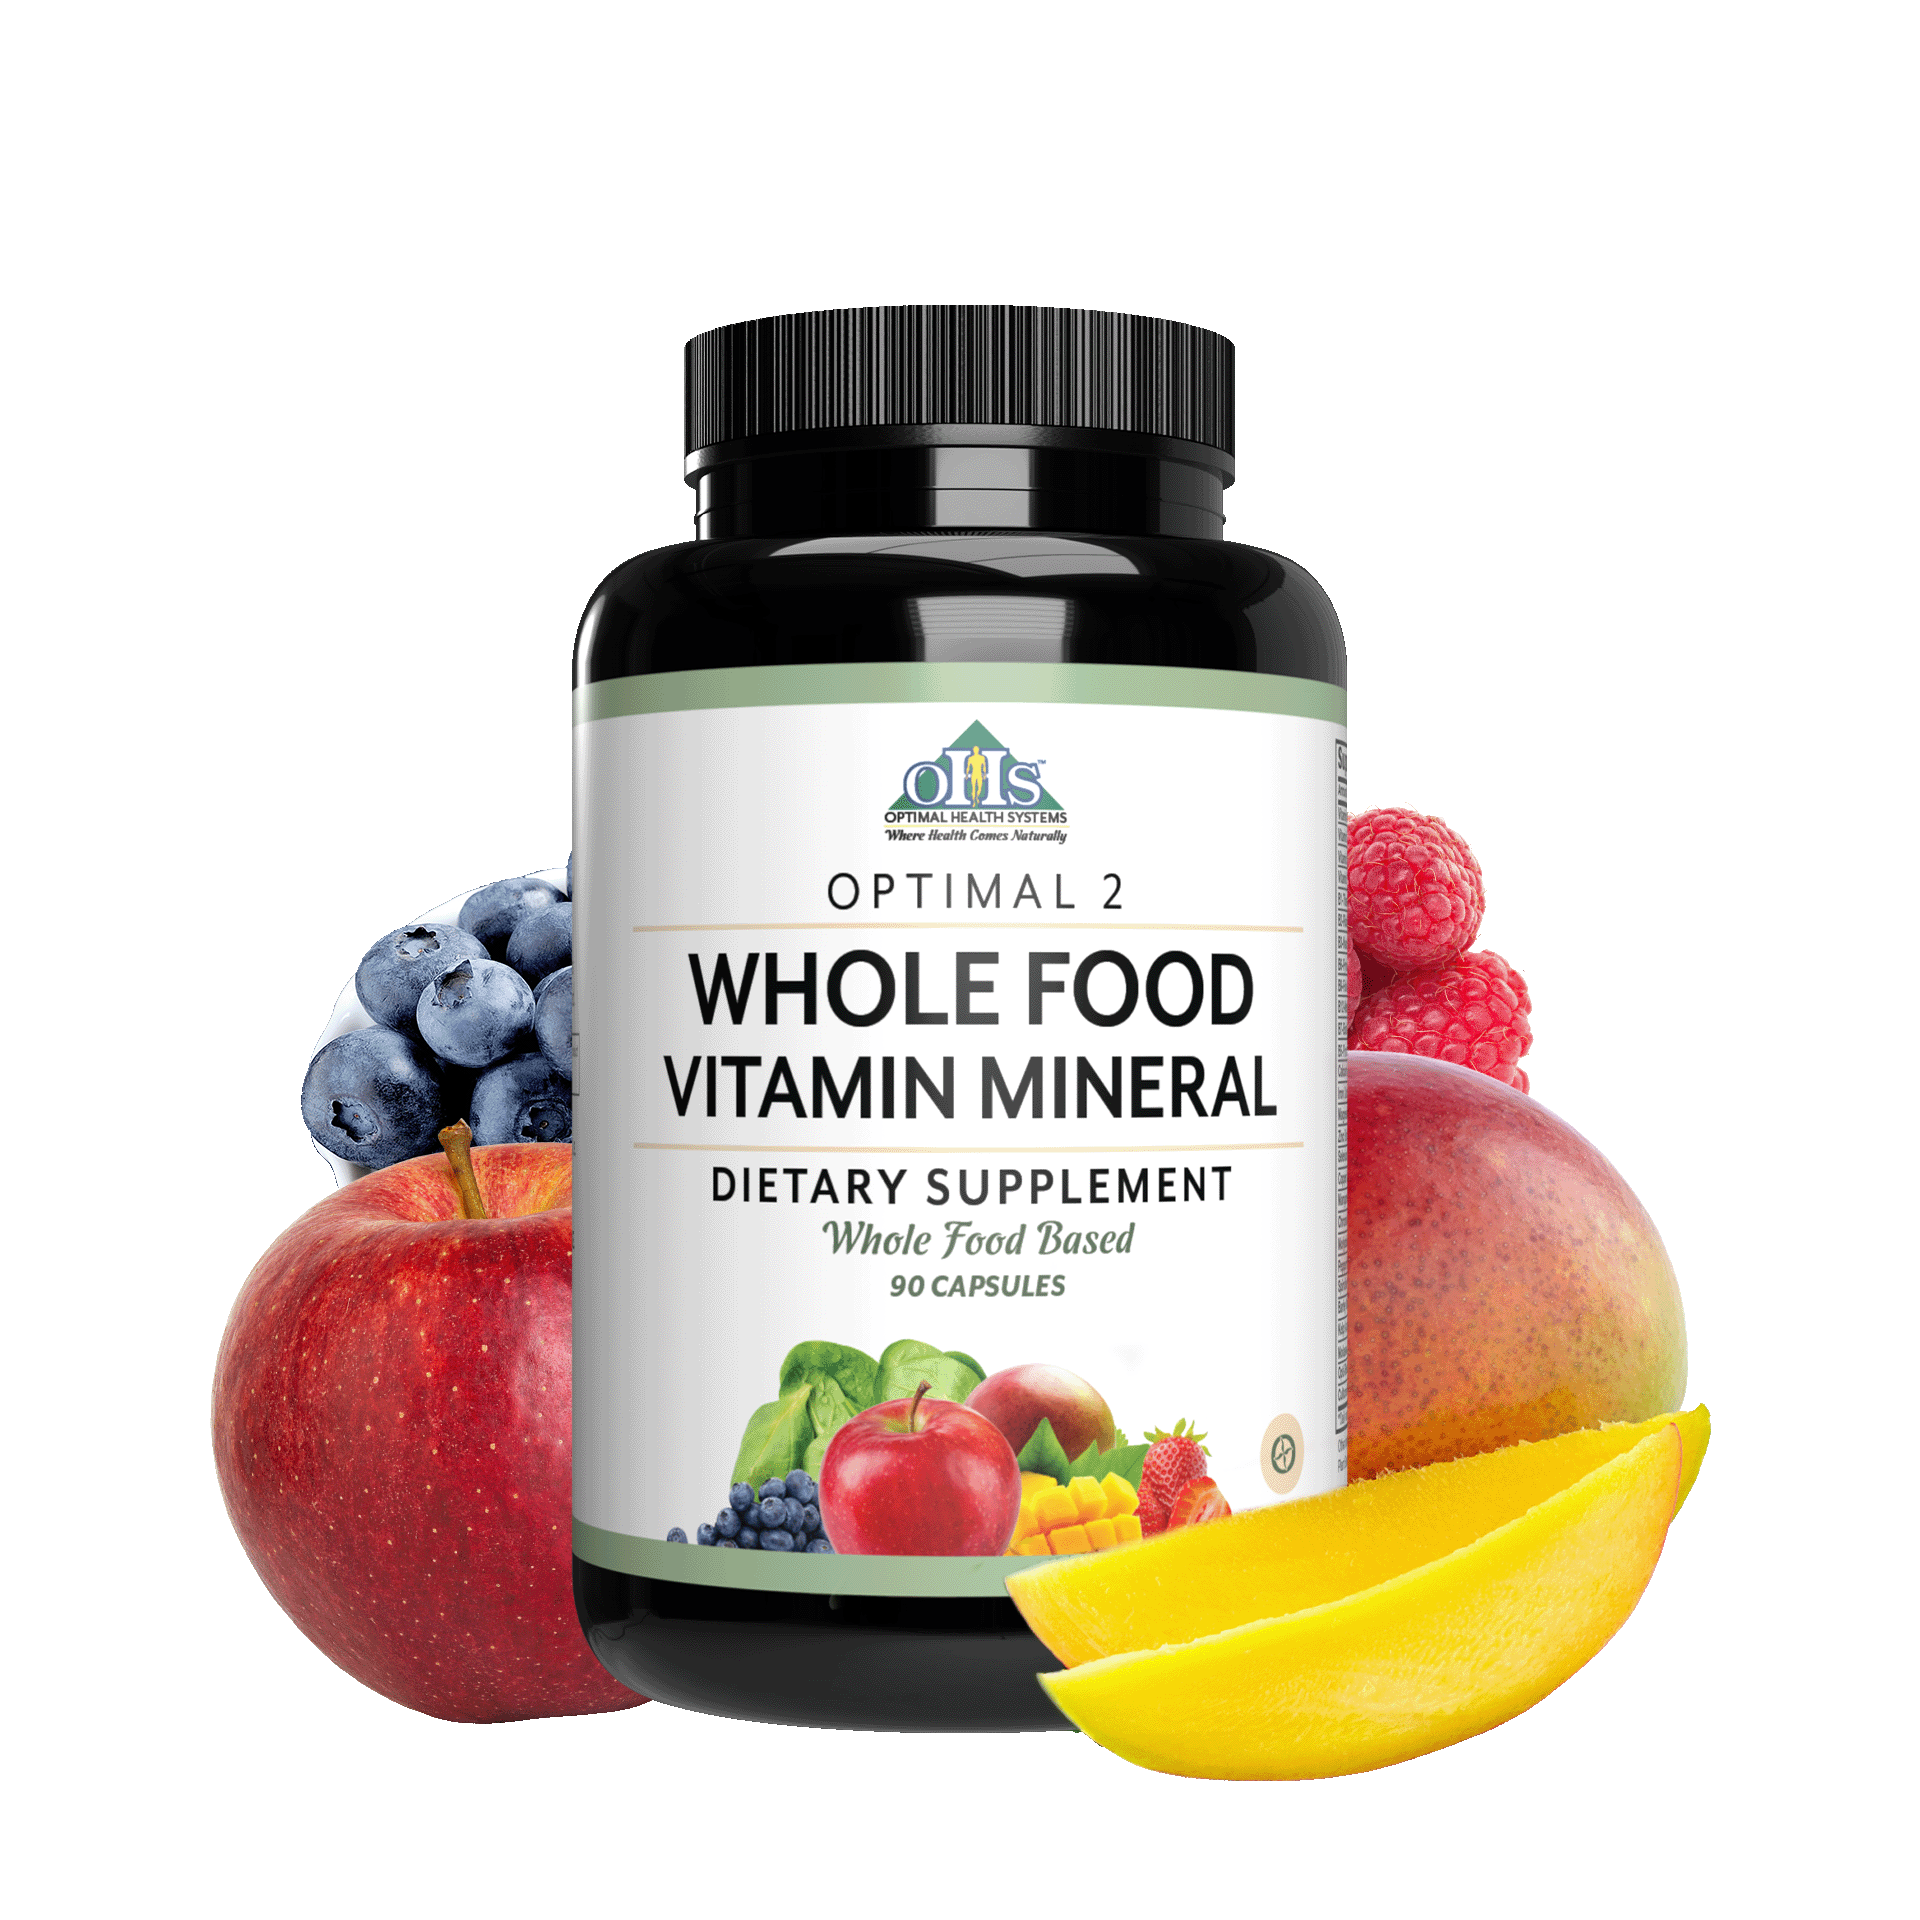 Image of a bottle of Optimal 2 Whole Food Vitamin Mineral. Around the bottle are blueberries, raspberries, mangoes, and apples.